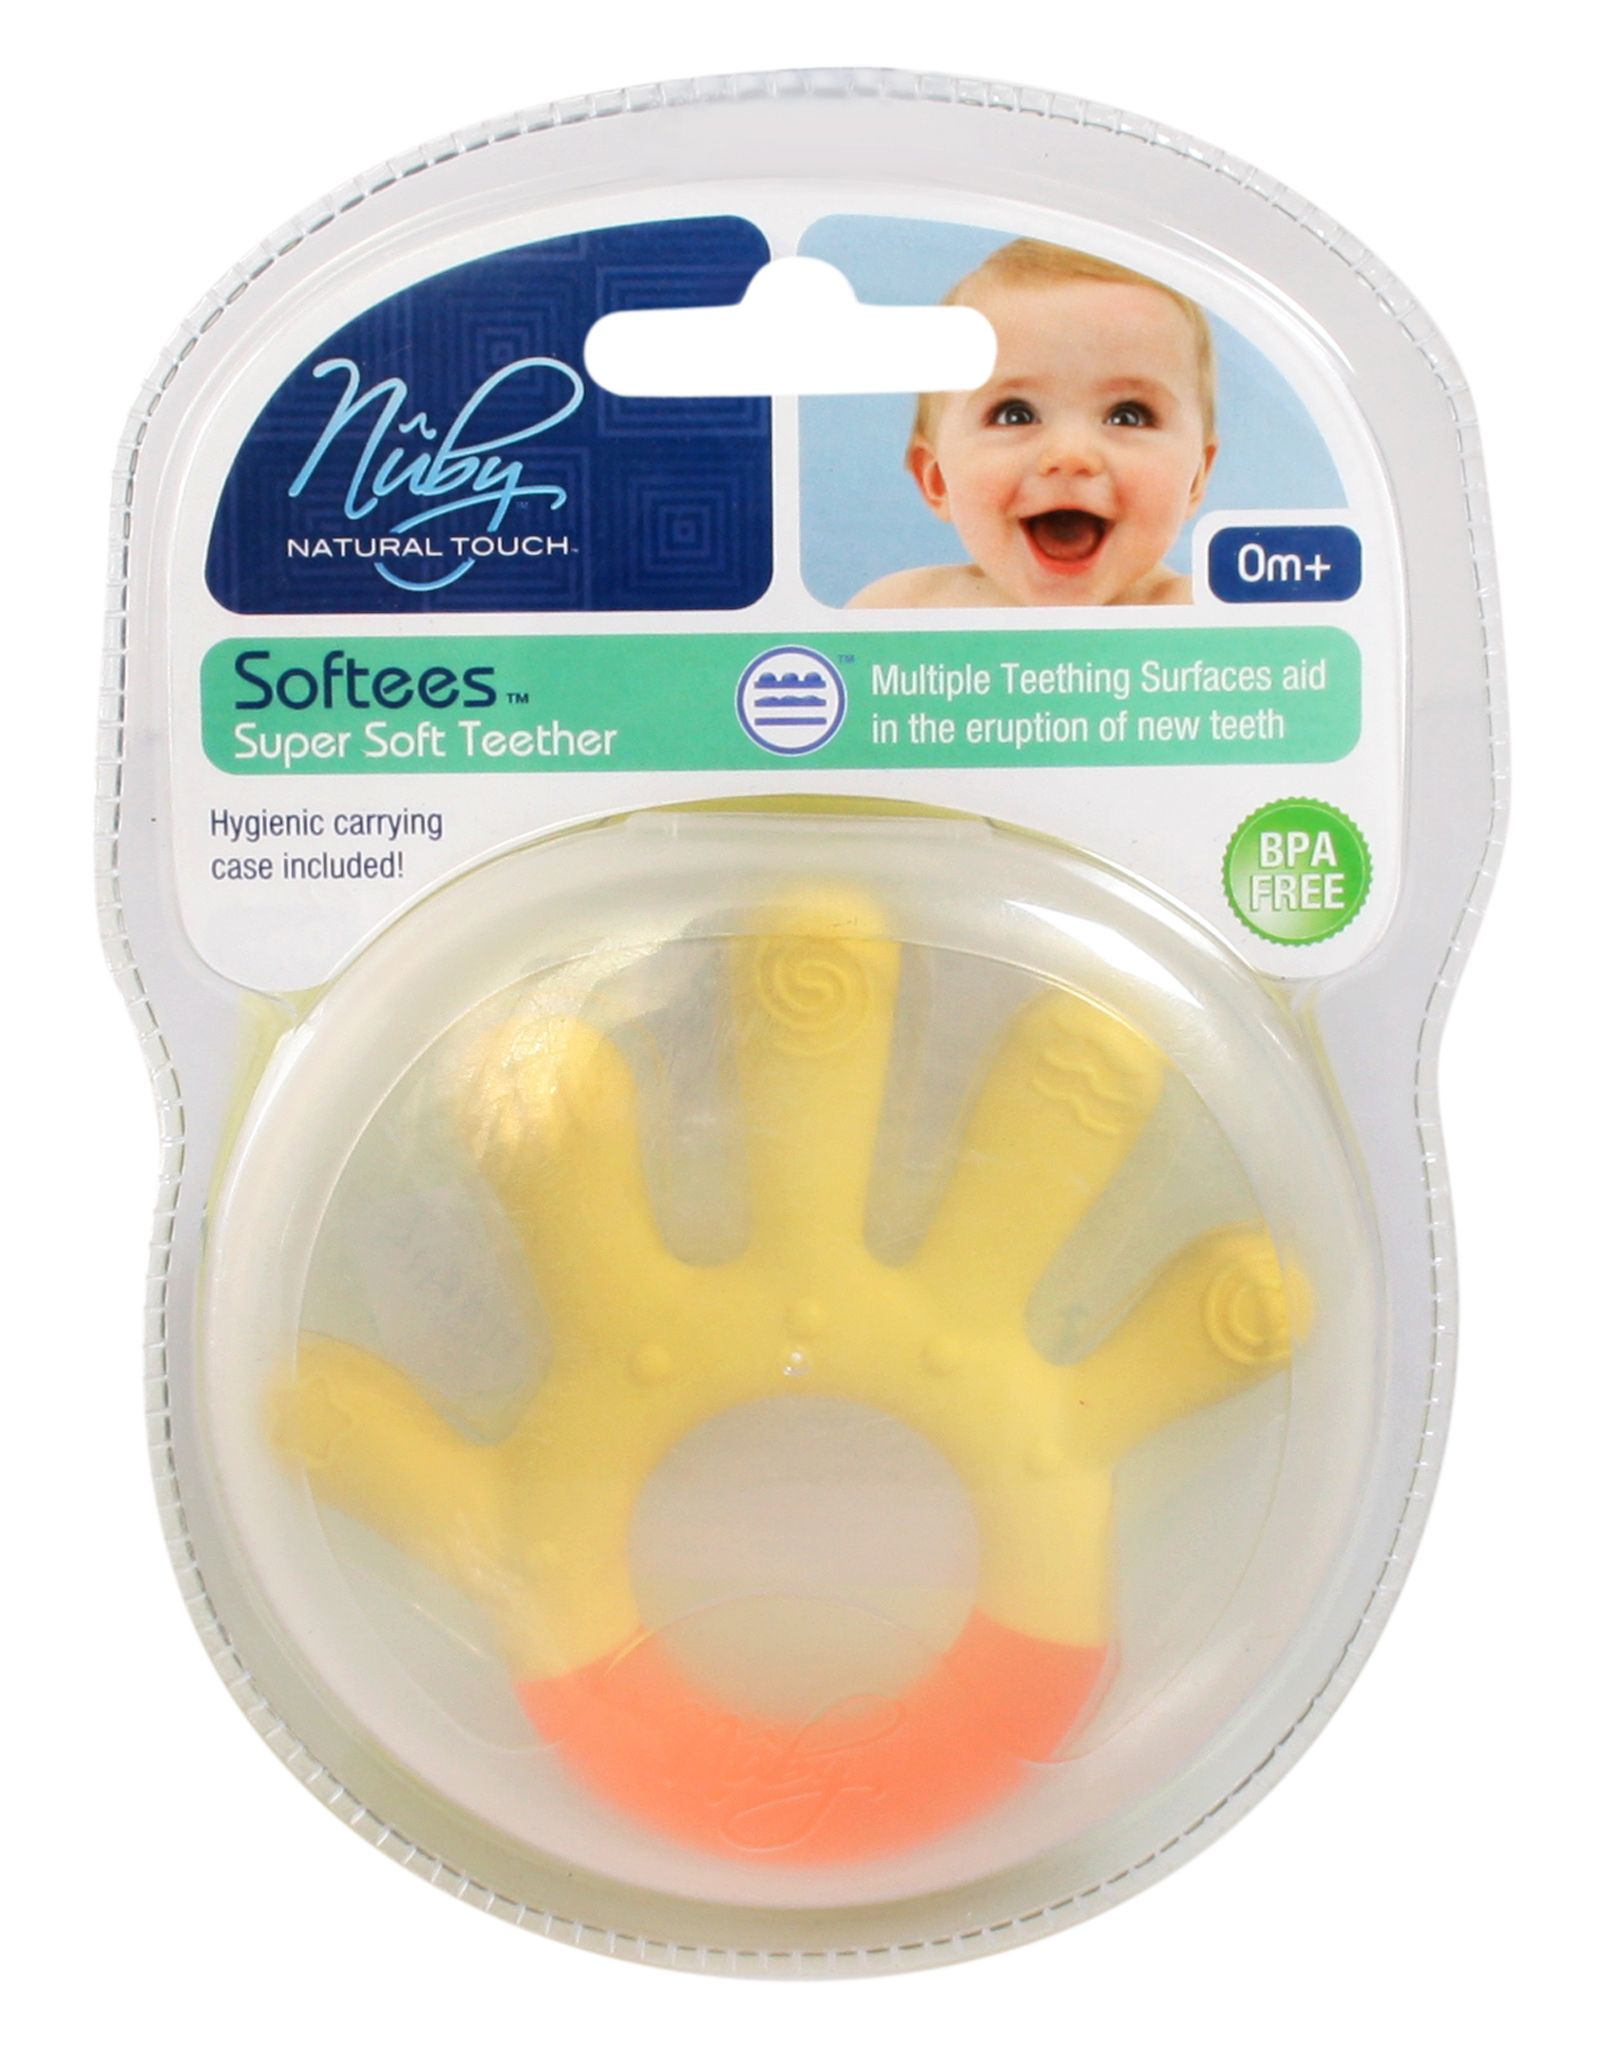 Nuby - Natural Touch Softees Super Soft Teether